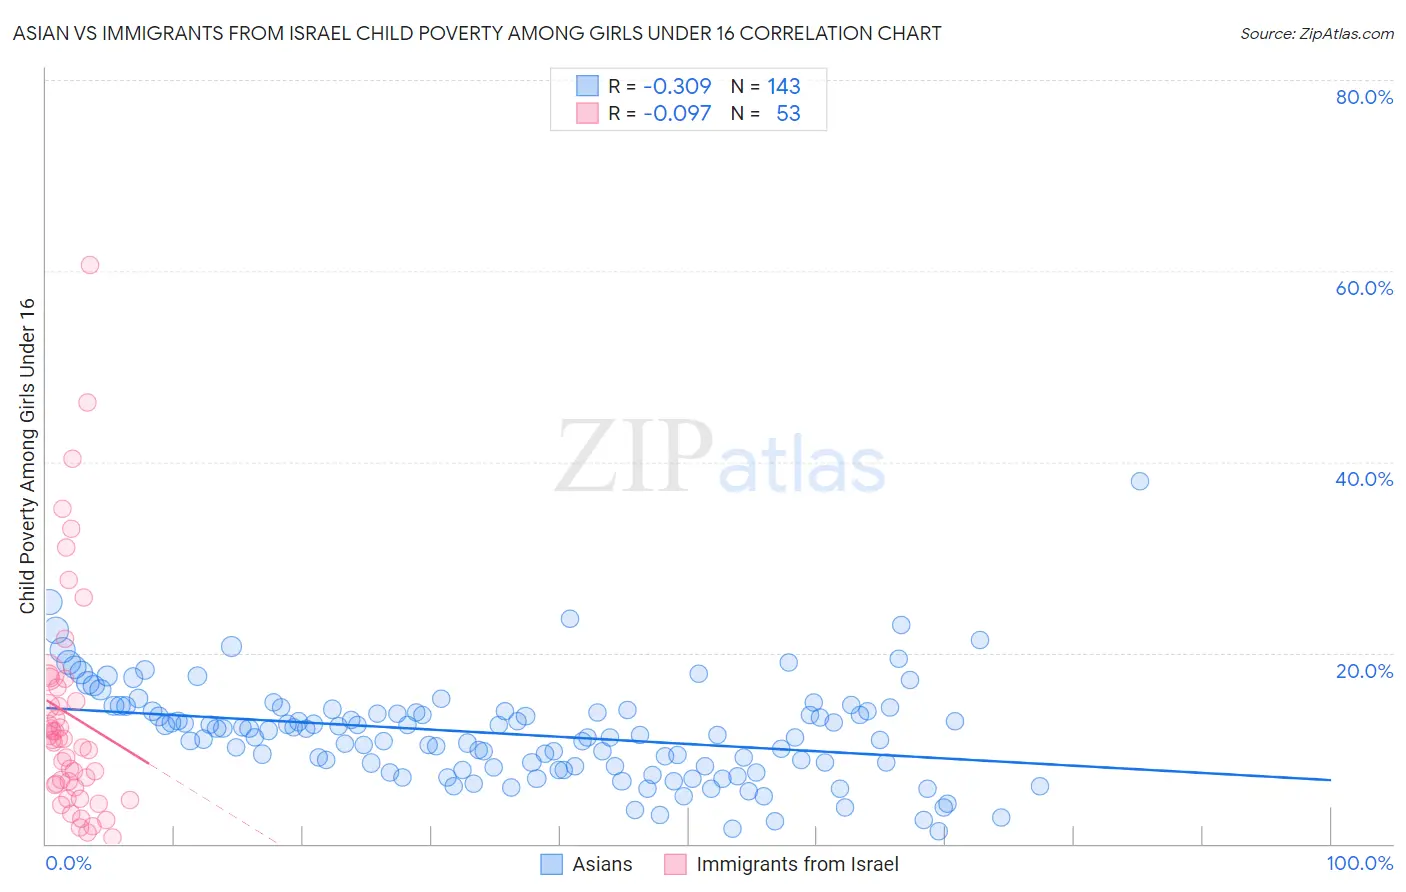 Asian vs Immigrants from Israel Child Poverty Among Girls Under 16